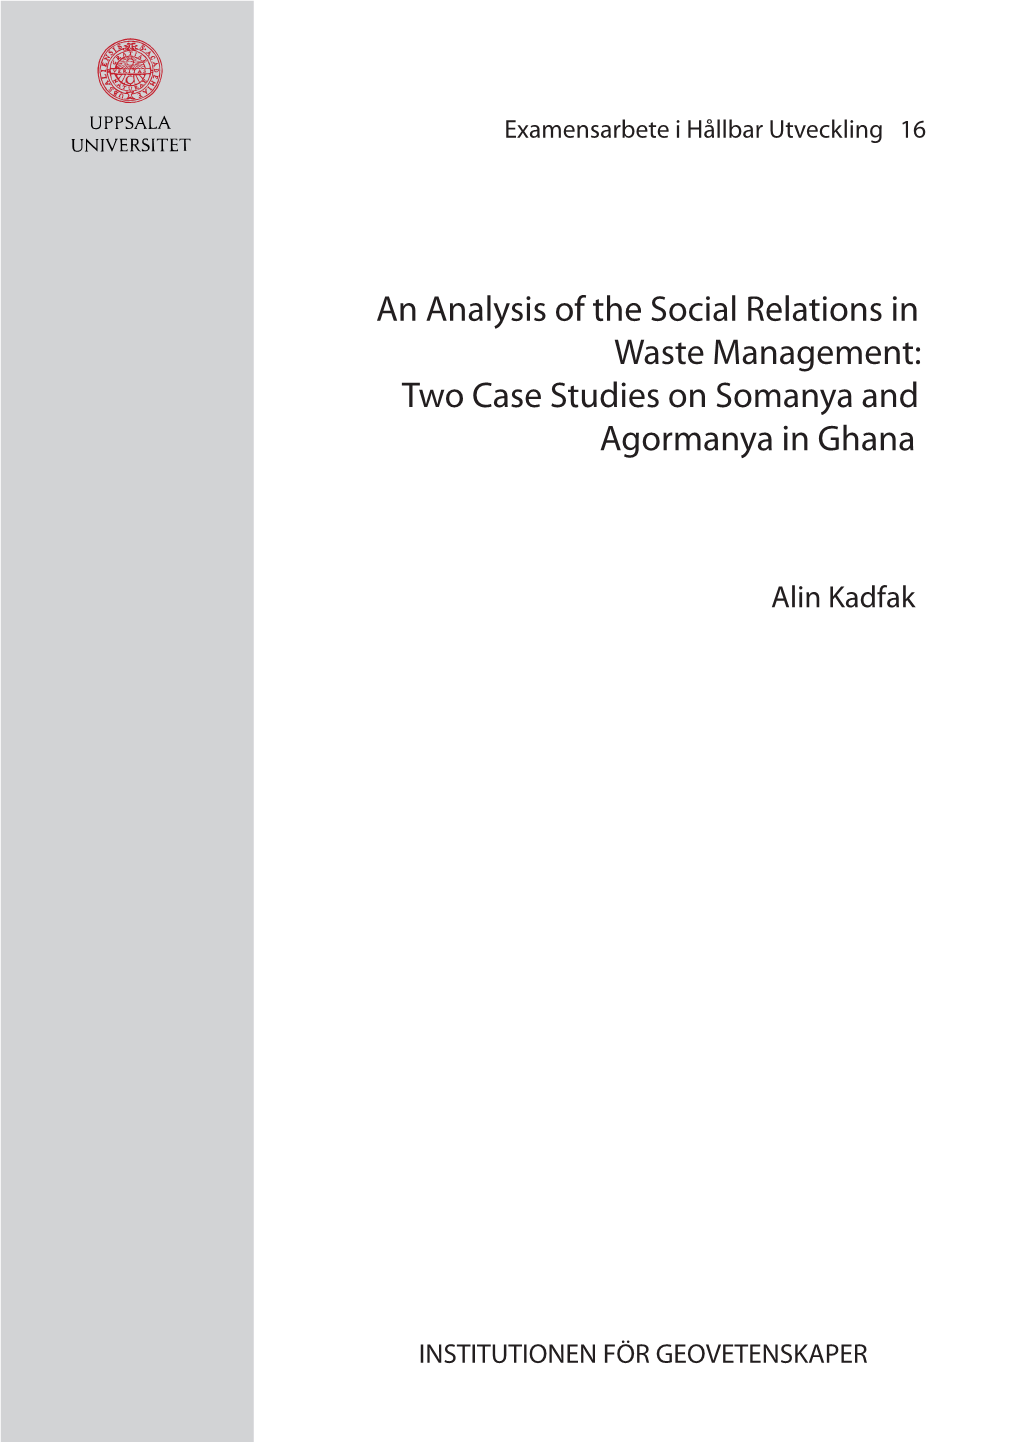 An Analysis of the Social Relations in Waste Management: Two Case Studies on Somanya and Agormanya in Ghana